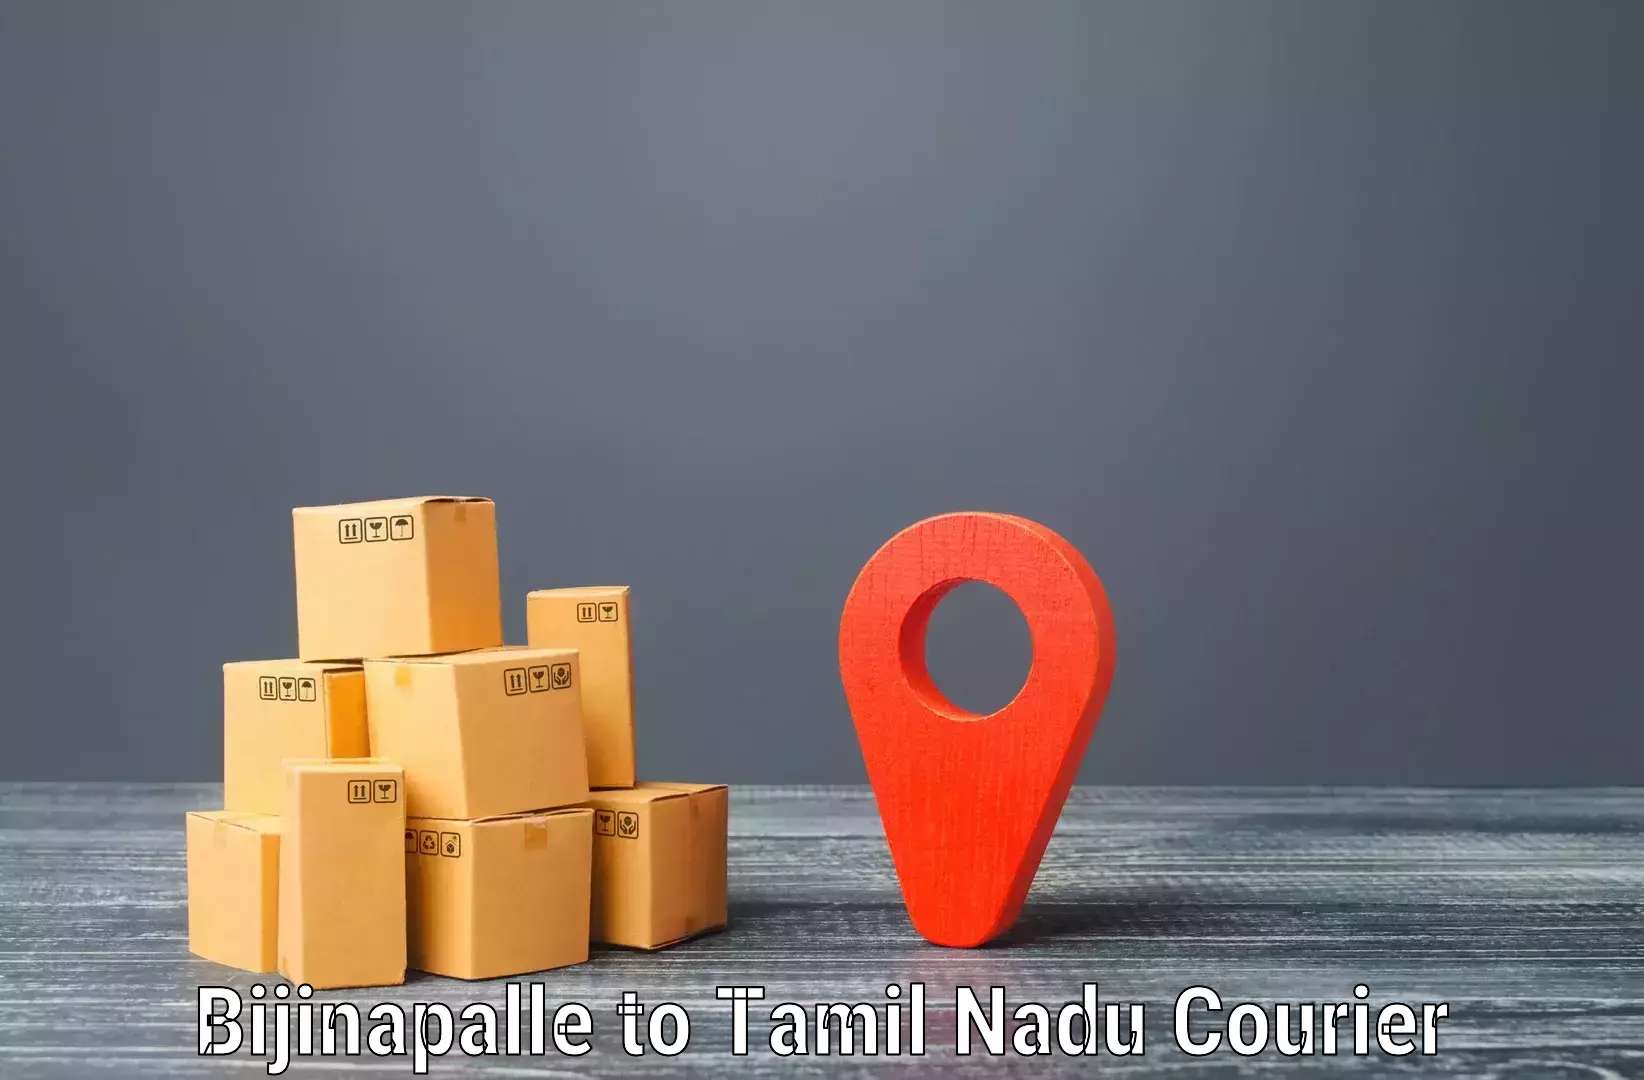 On-demand delivery Bijinapalle to Lalpet